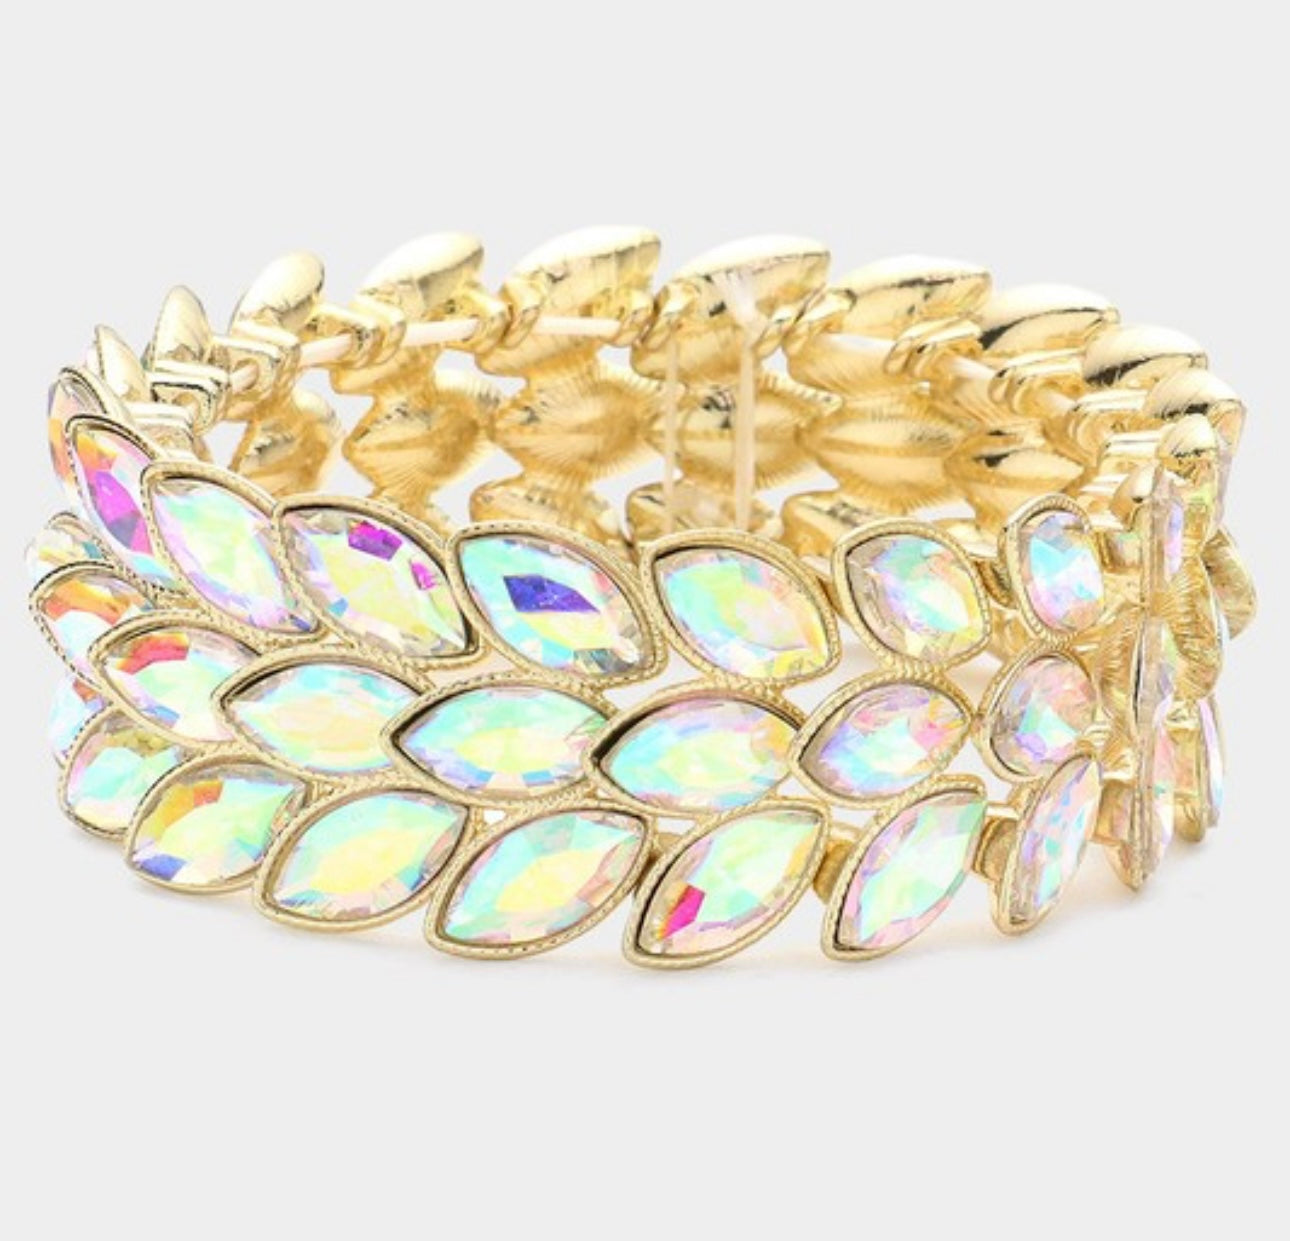 Marquise Stone Bracelet - Clear Tornasol